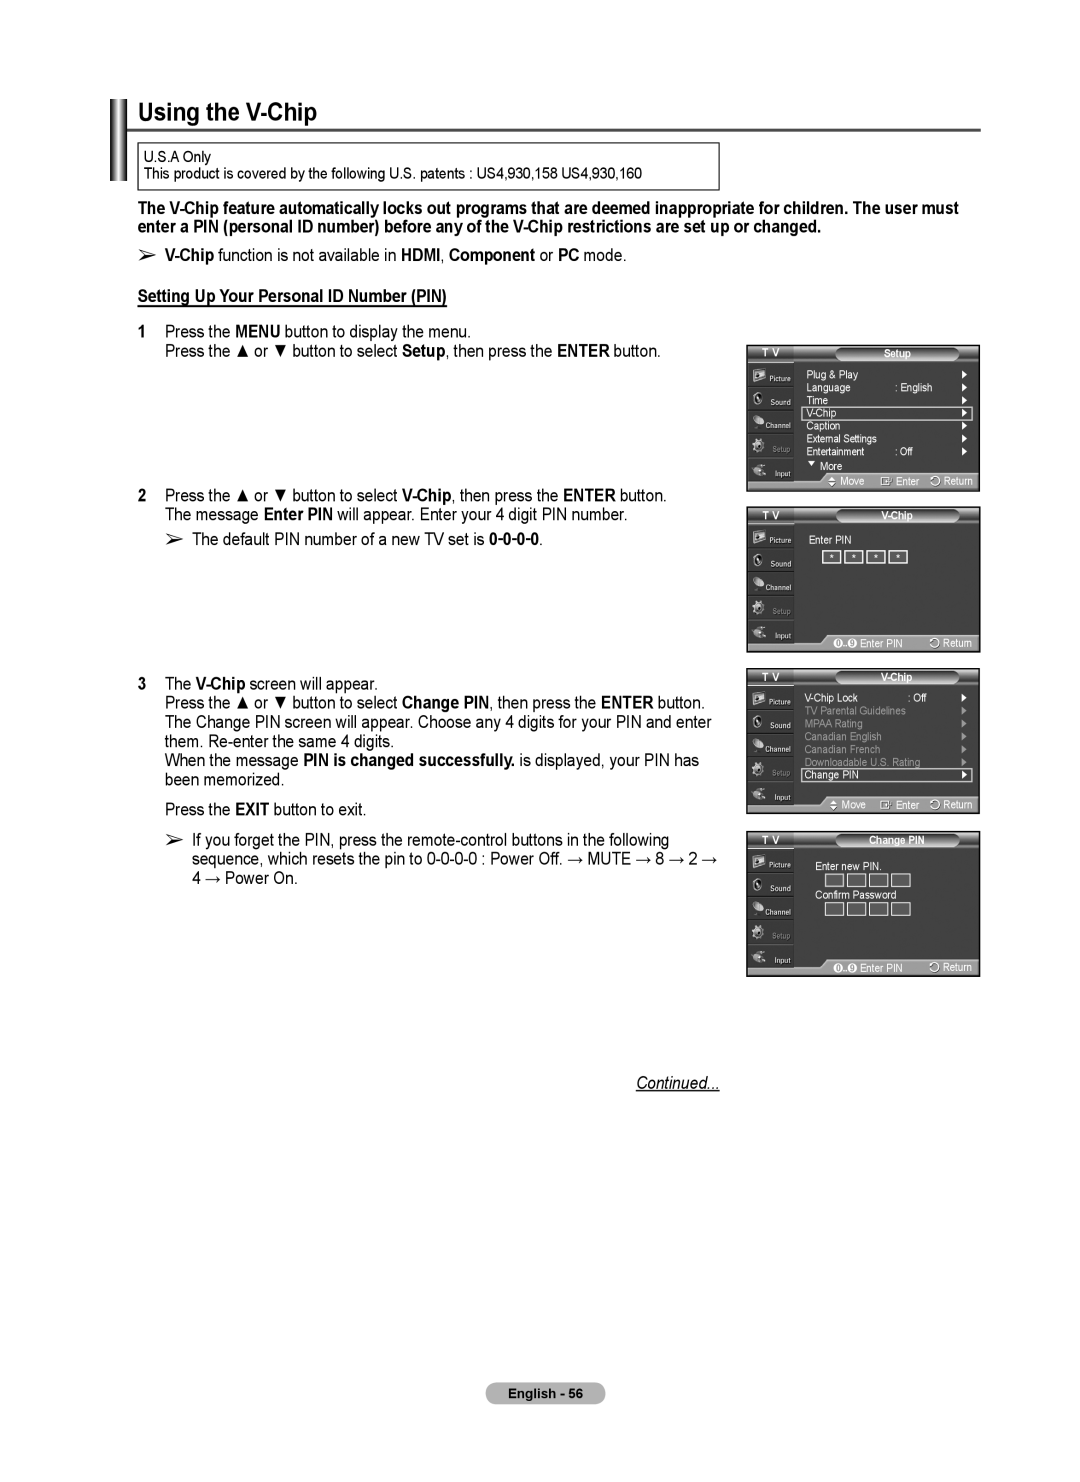 Samsung 460 user manual Using the V-Chip, Setting Up Your Personal ID Number PIN, Continued 